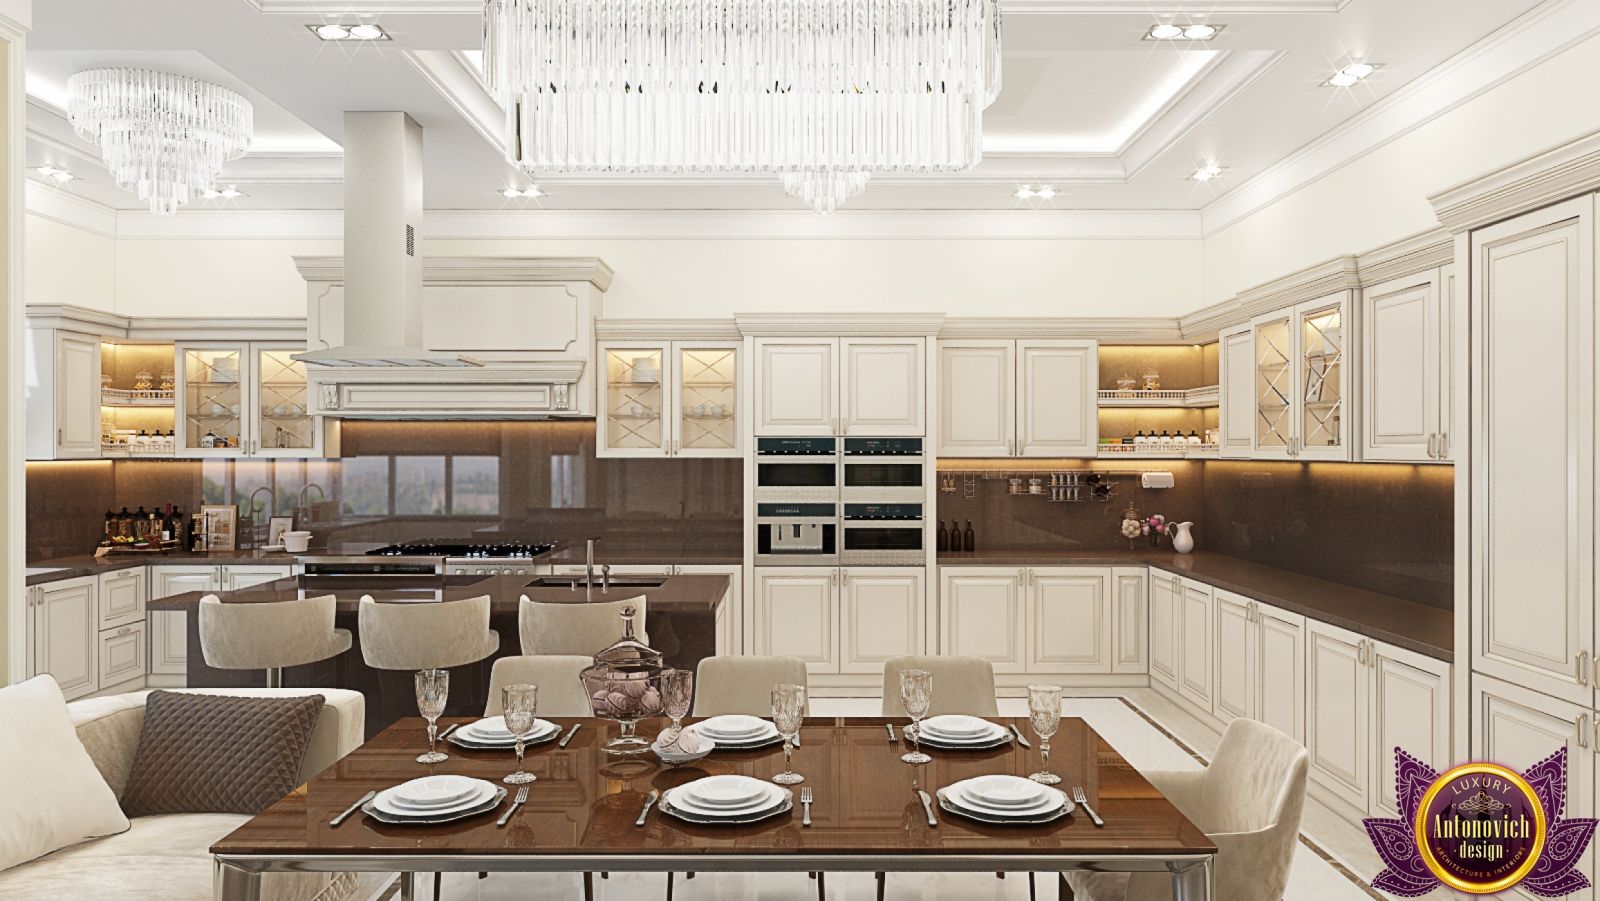 Minimalist kitchen design with clean lines and neutral colors